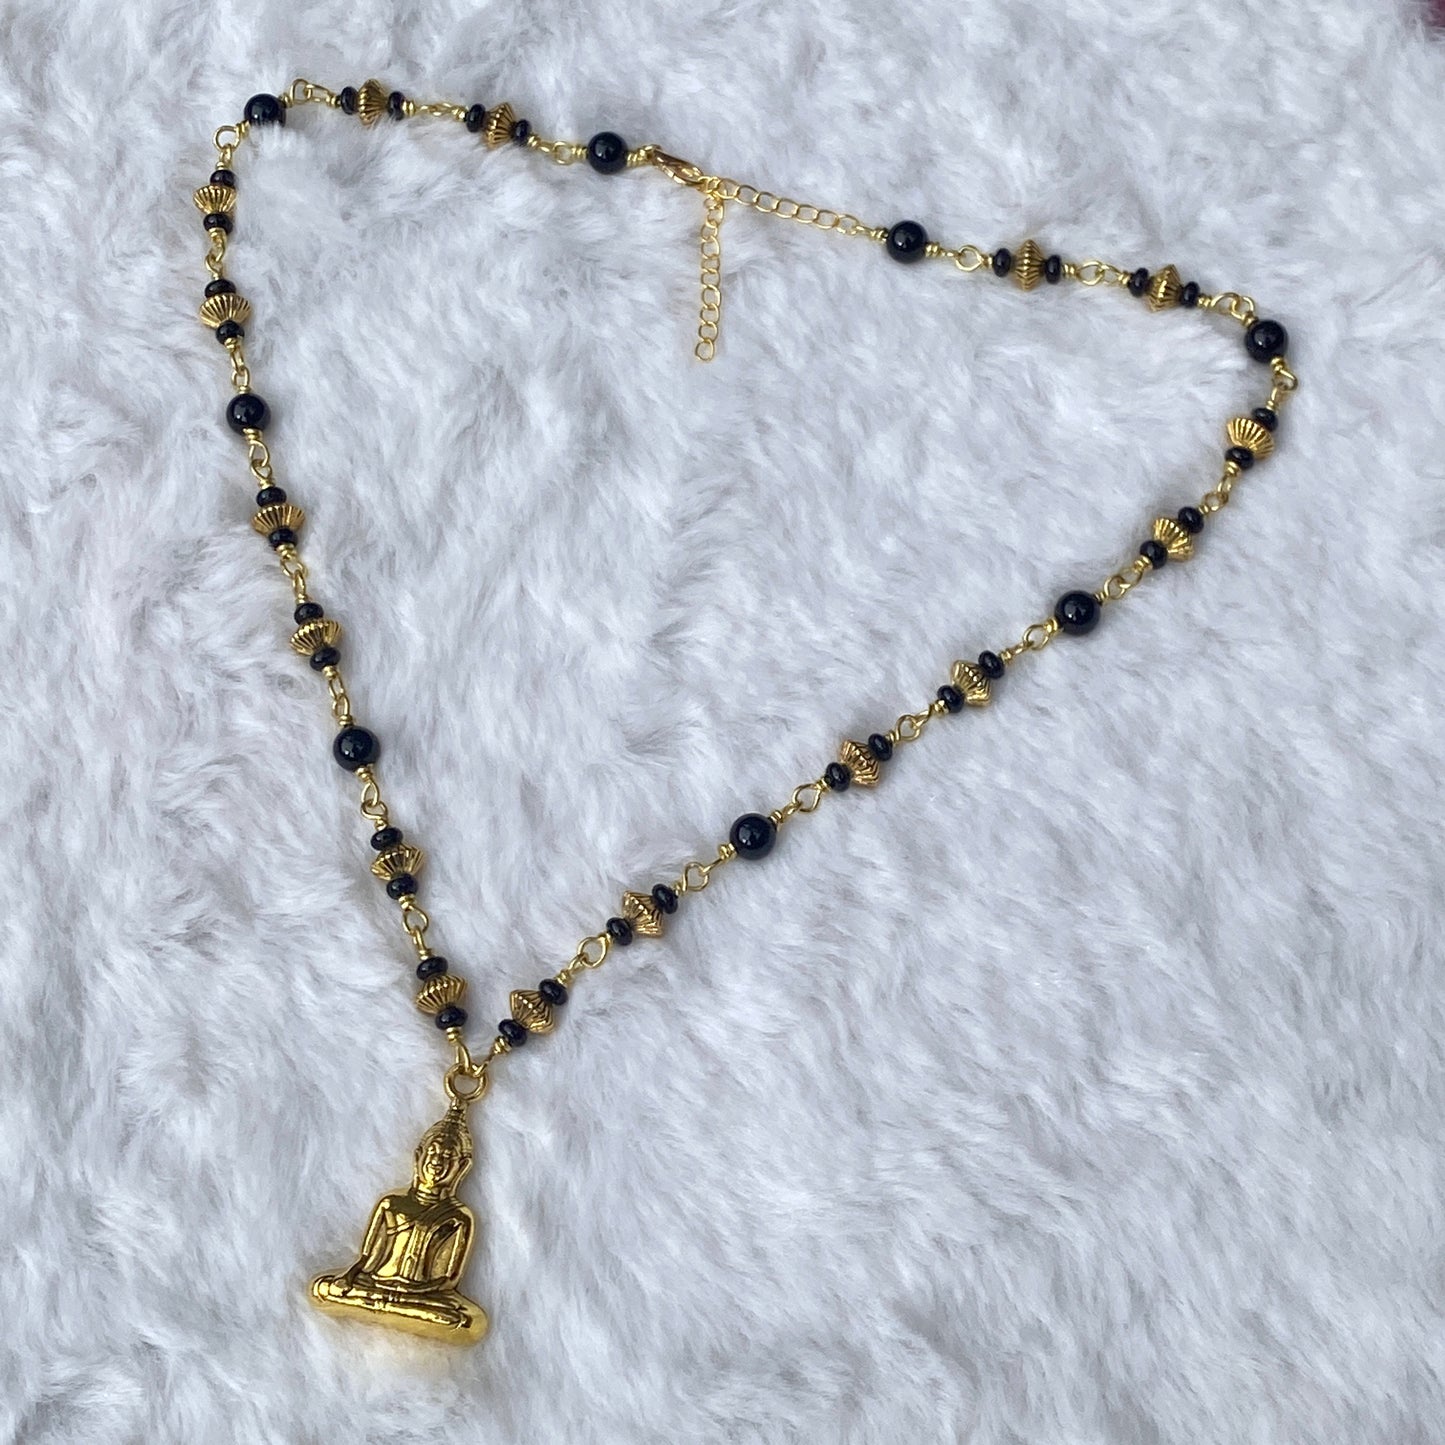 Onyx and Golden Buddha Necklace